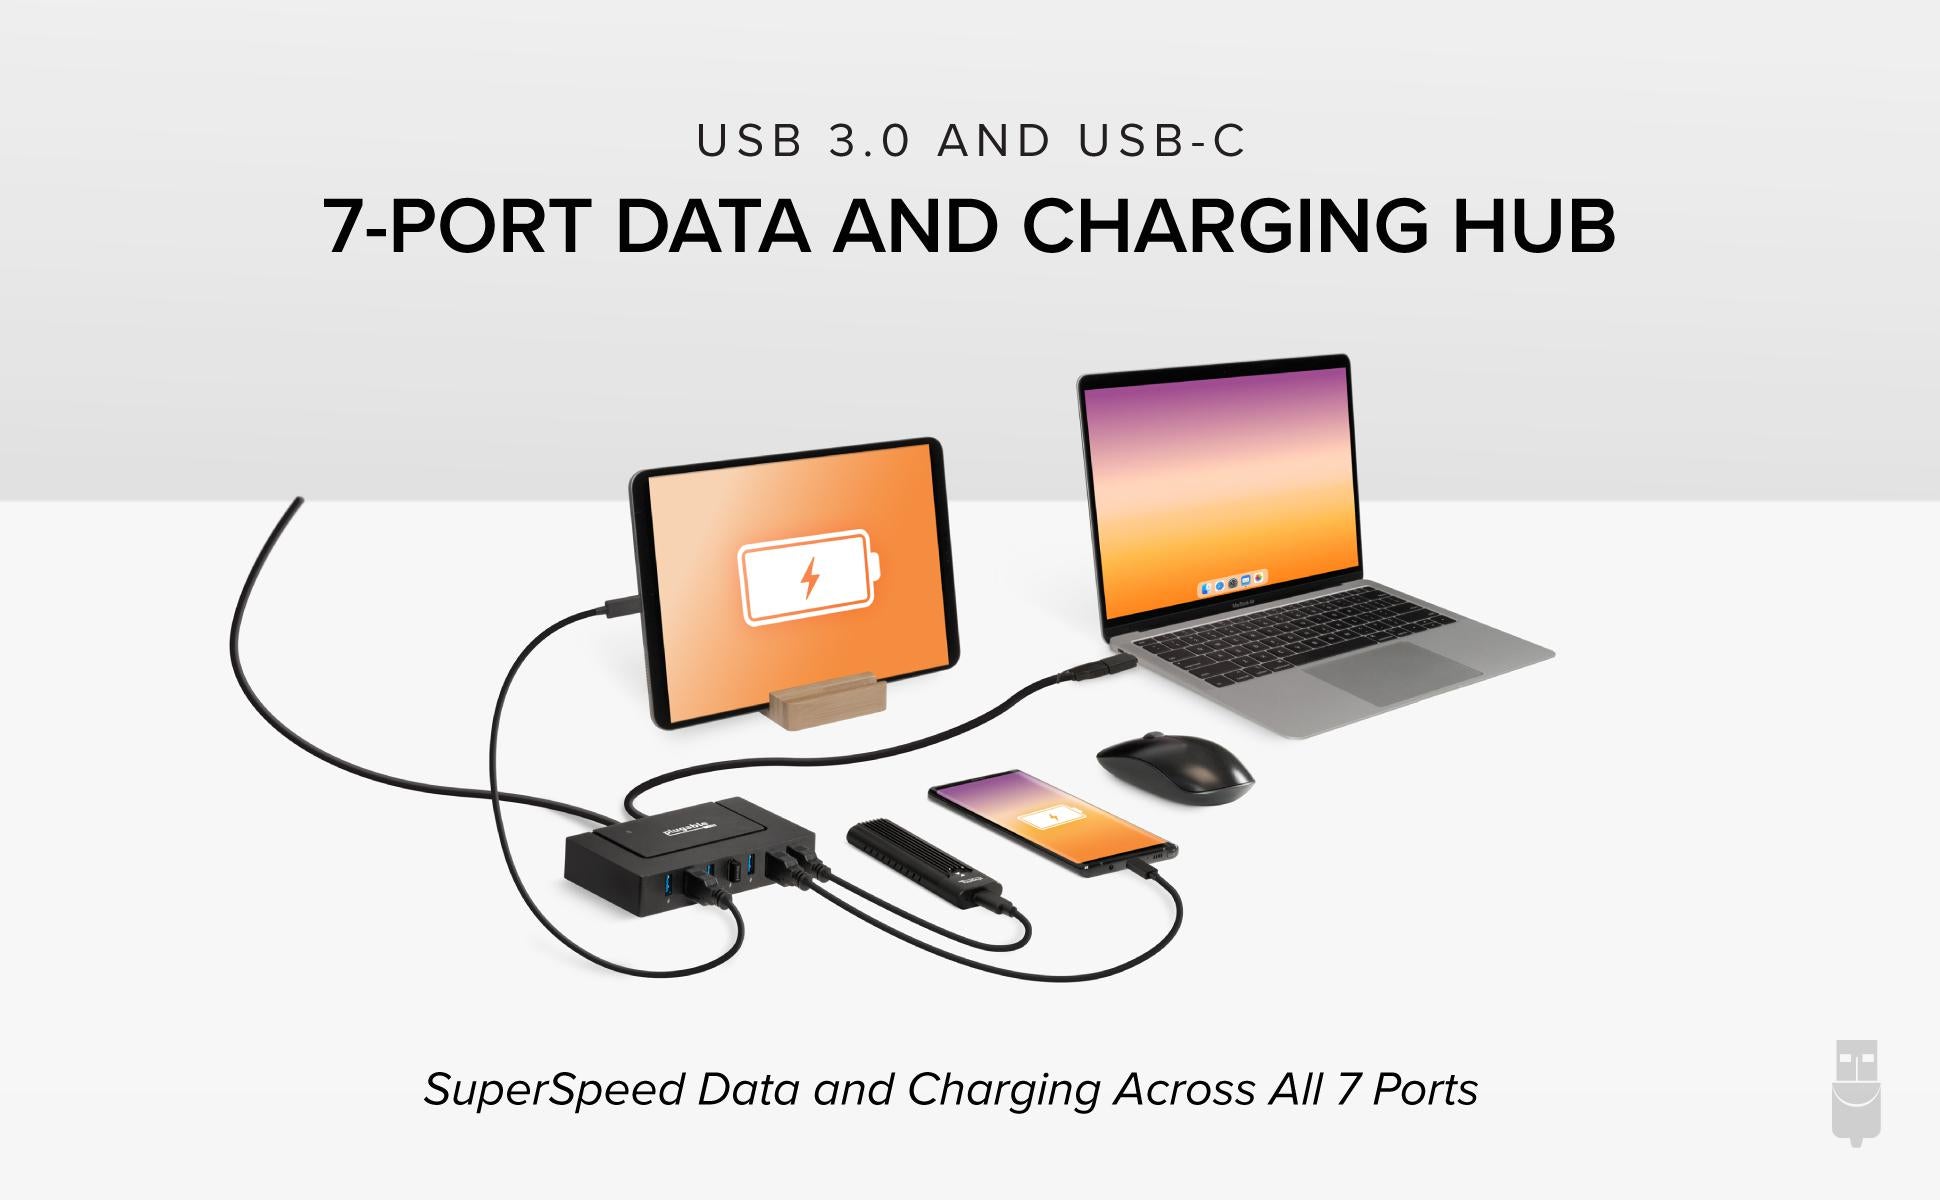 7-Port USB Data and charging Hub connected to laptop, phone, tablet, and other devices.